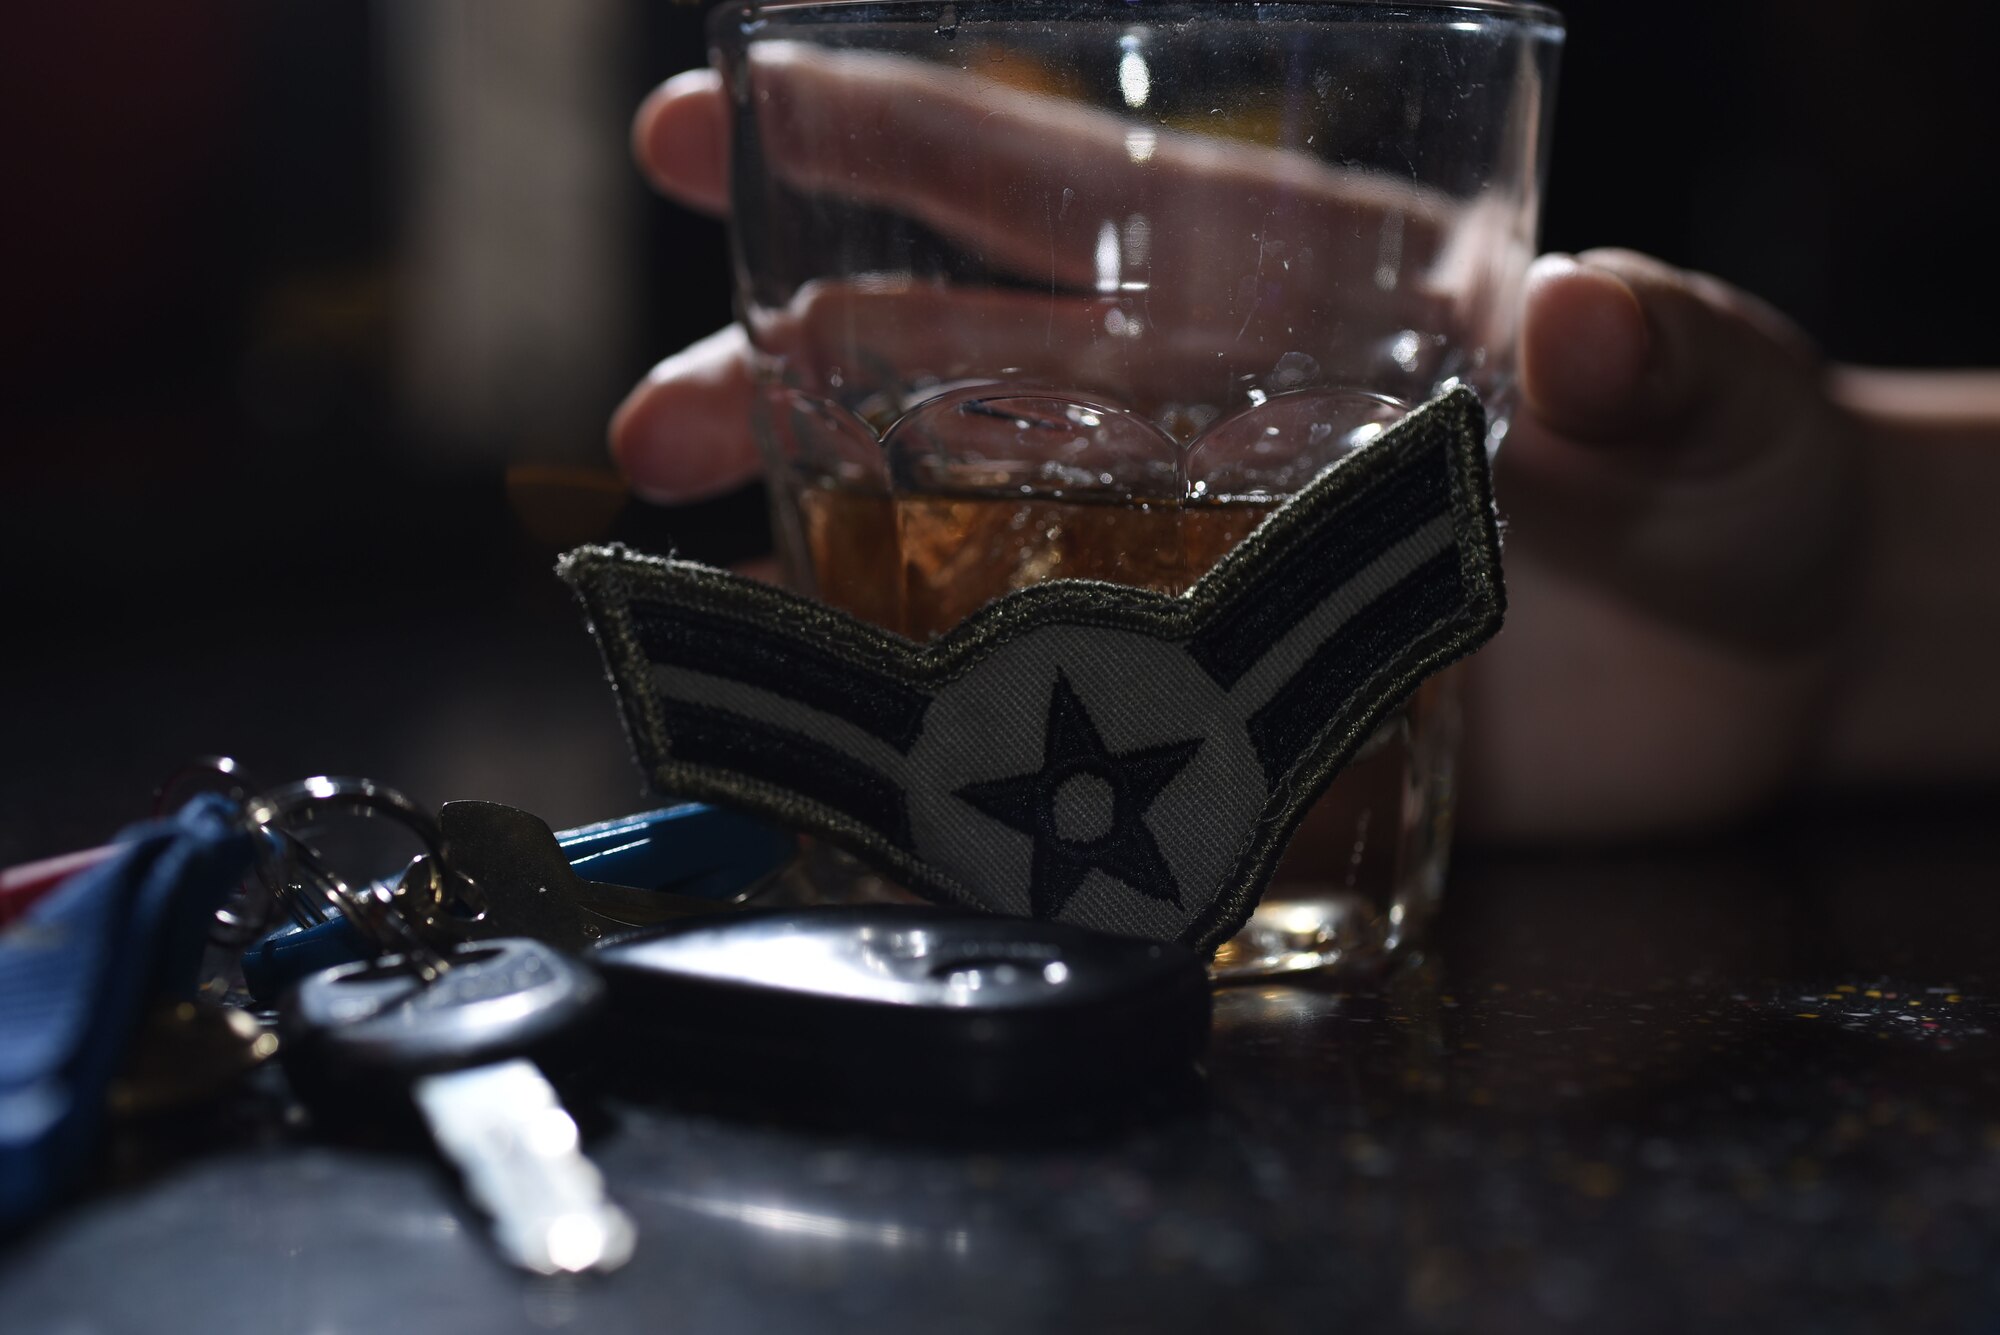 The Airmen Against Drunk Driving program was established with the intent to prevent consequences from driving under the influence, and is a way for Airmen to look our for their wingmen. To volunteer for or request Grand Forks AFB's AADD services, call 70-747-2233. (U.S. Air Force photo illustration by Airman 1st Class Elora J. Martinez)